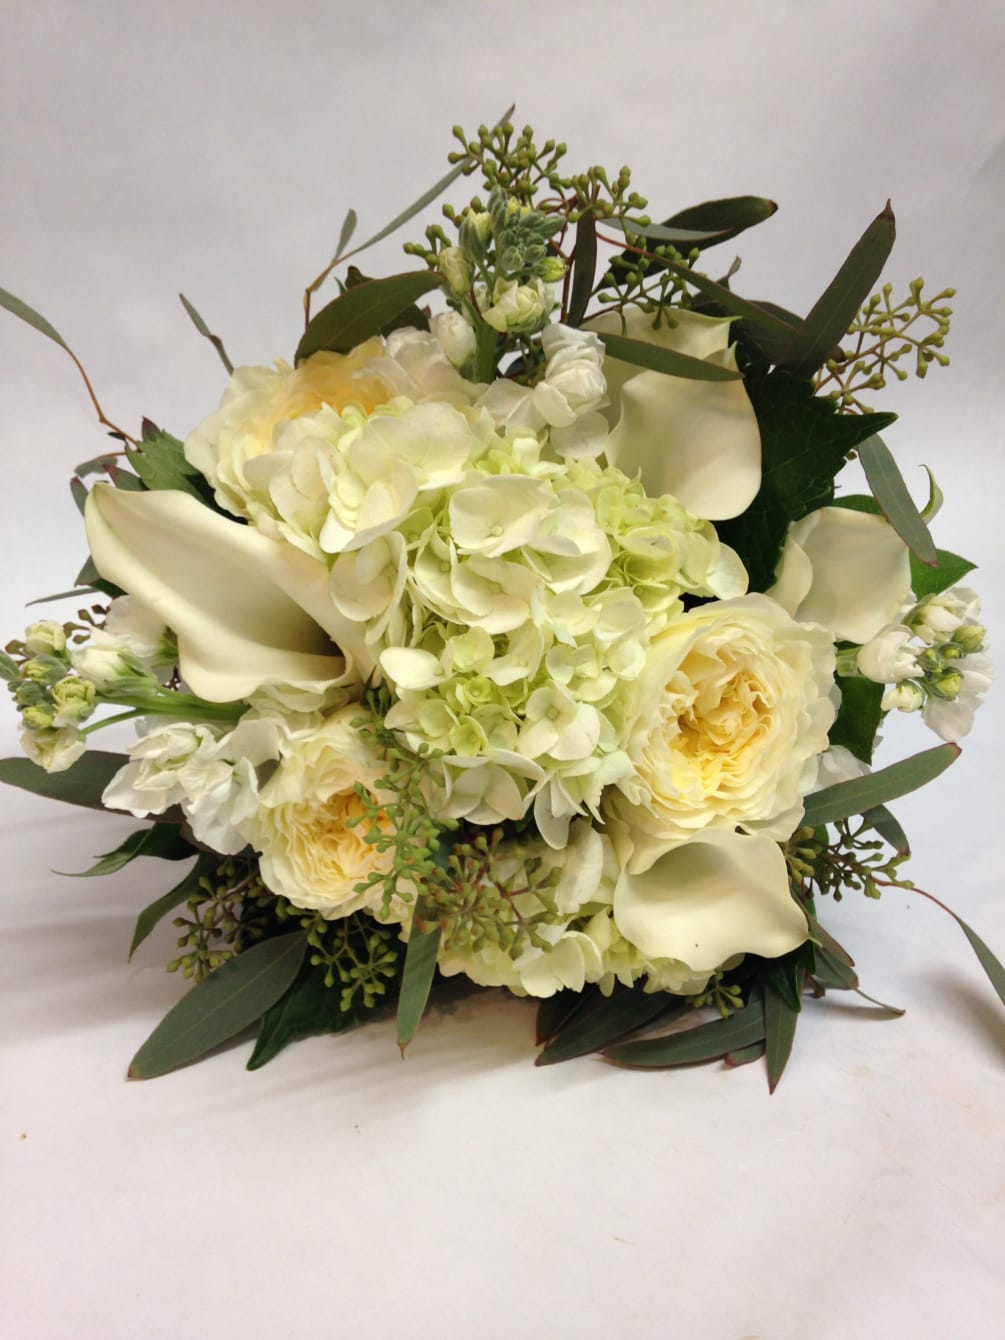 Calla lillies, garden roses, hydrangea, and stock are surrounded by seeded eucalytus